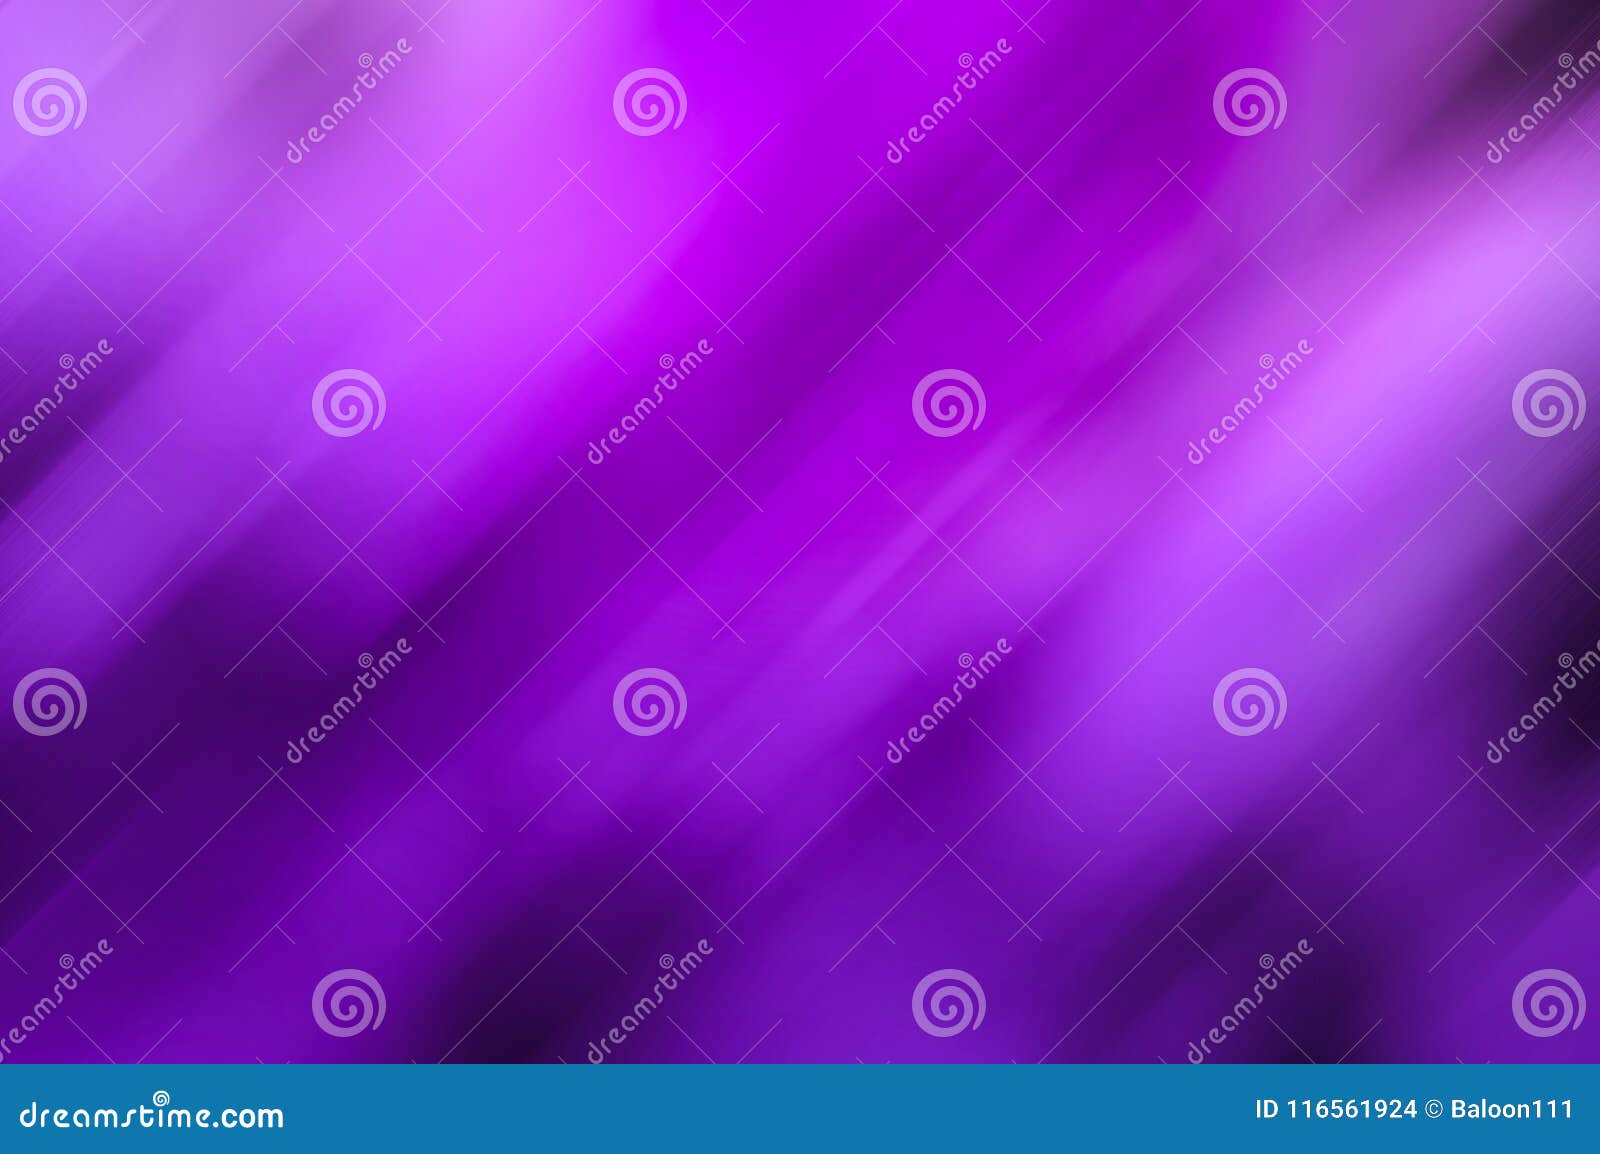 ultra violet abstract background